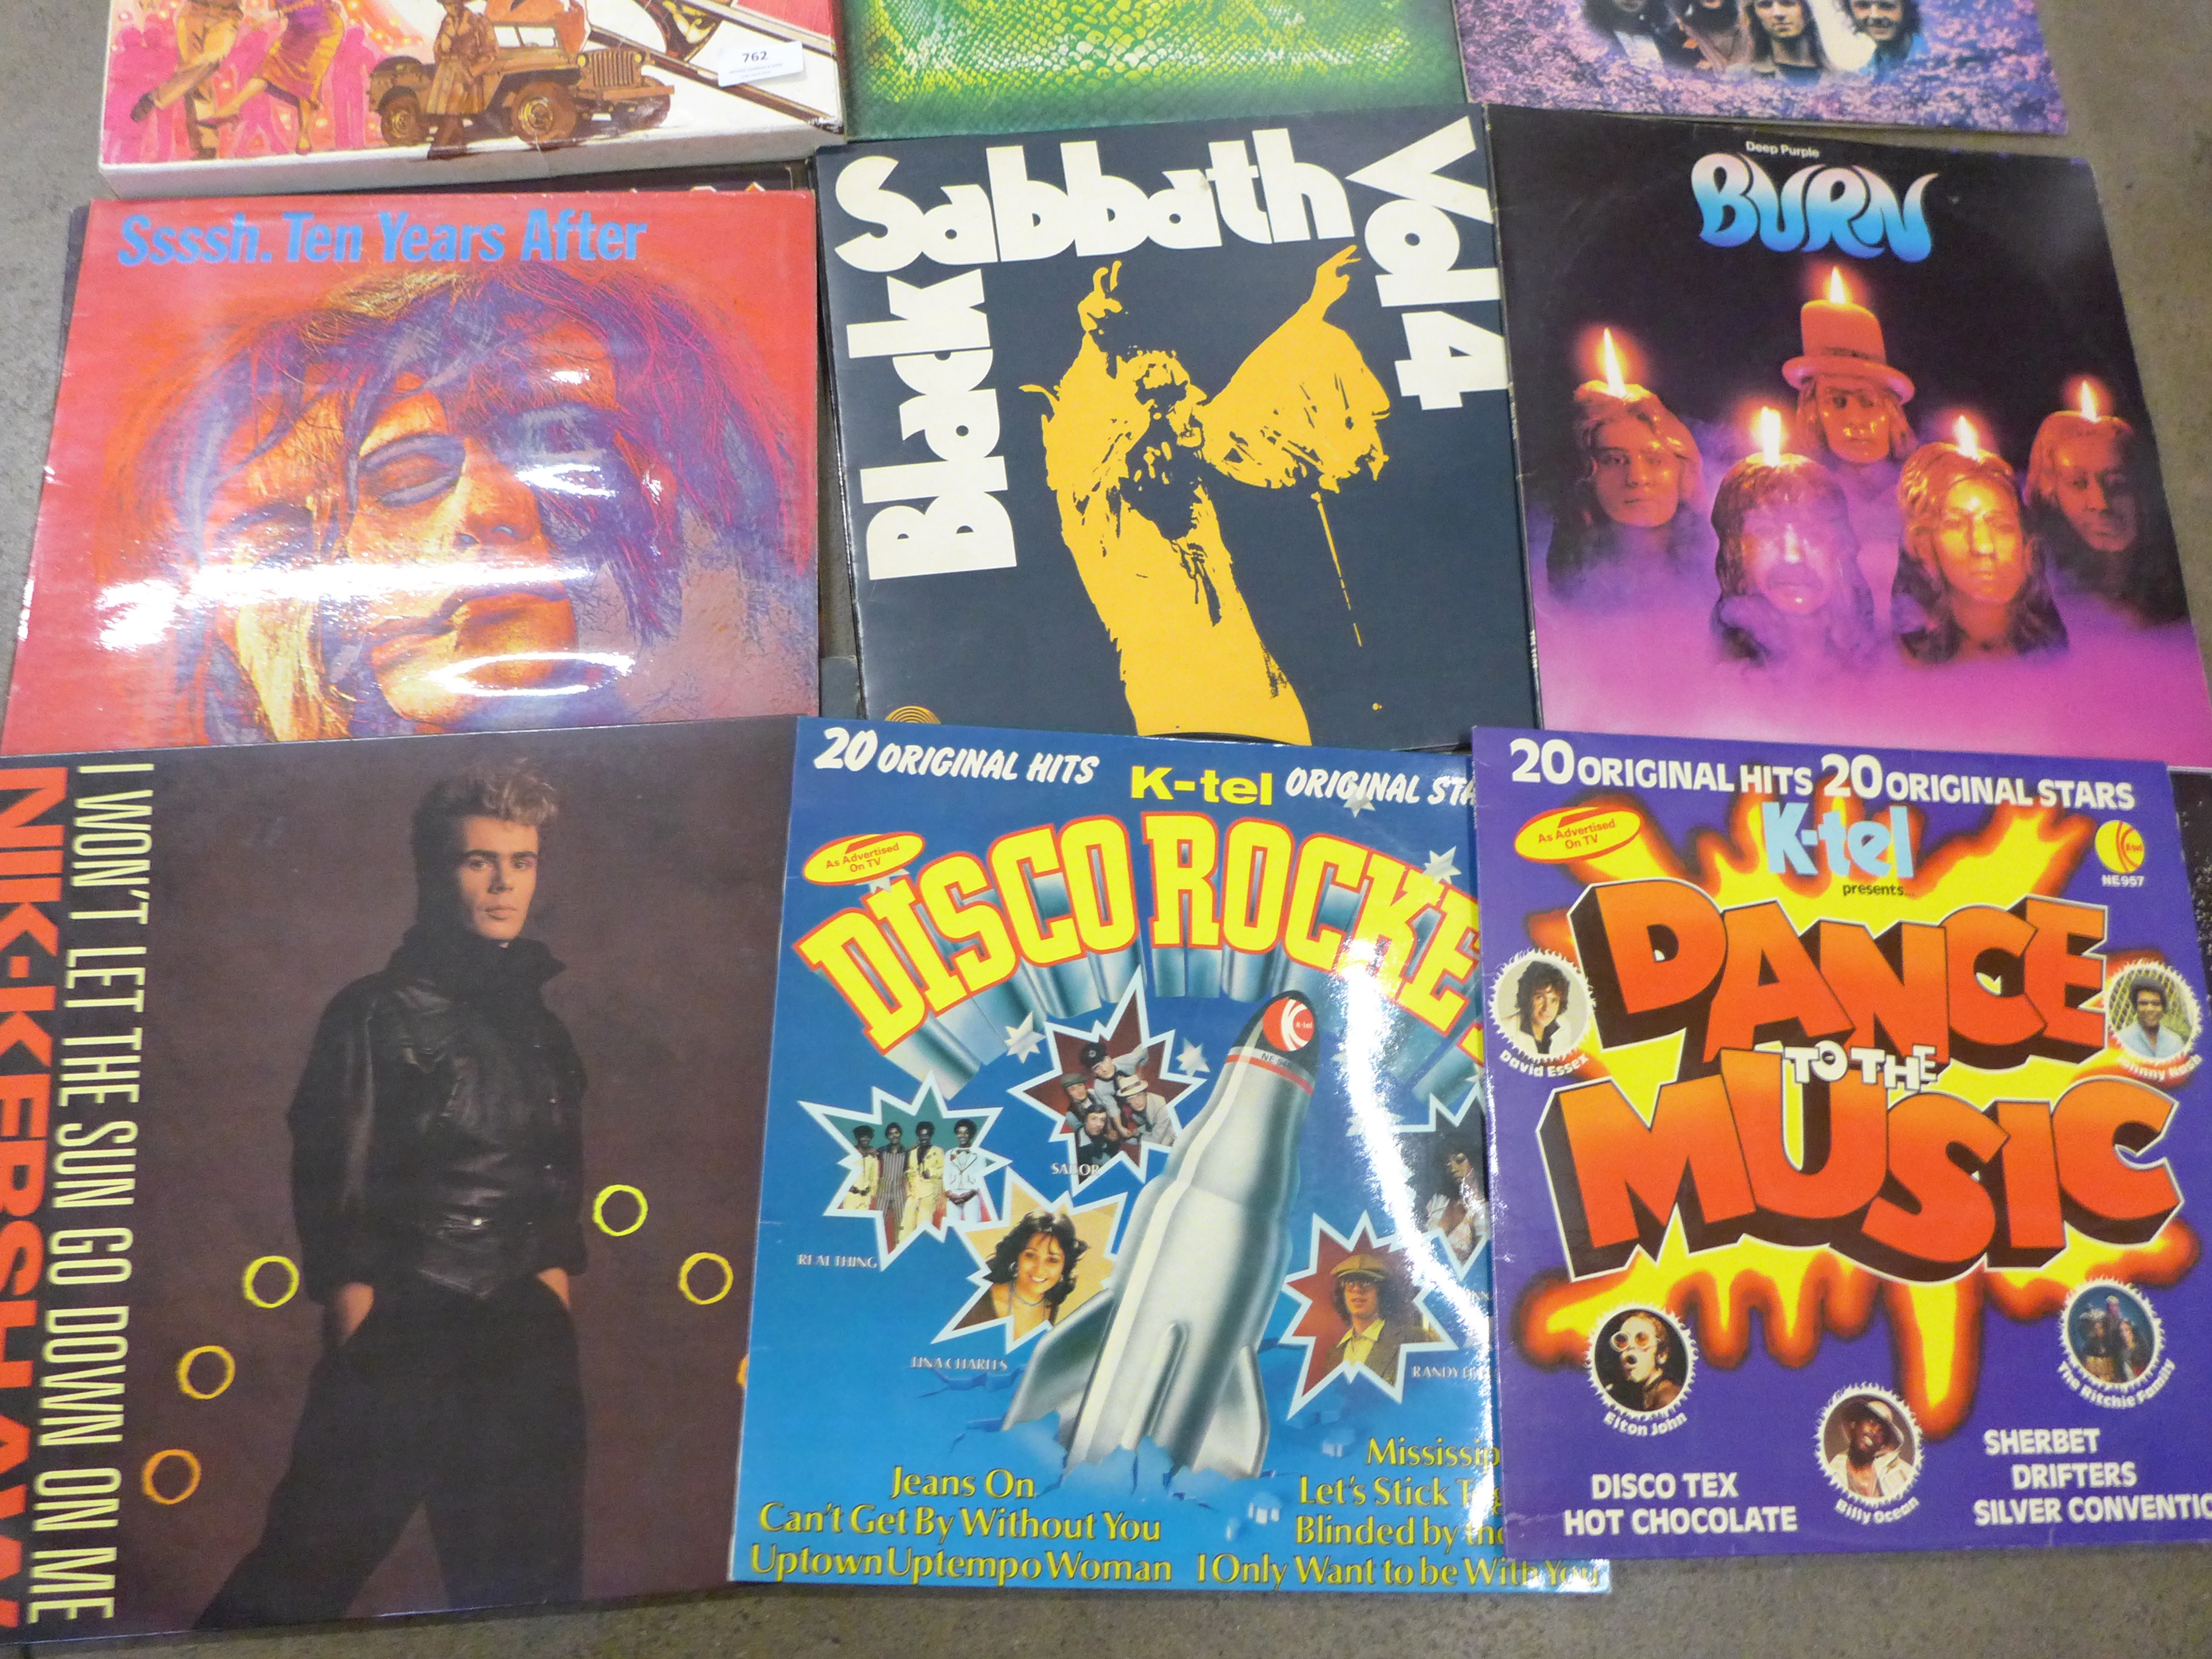 A collection of LP records; Alice Cooper, Black Sabbath, Glen Miller, Bee Gees, etc. (19) - Image 2 of 3